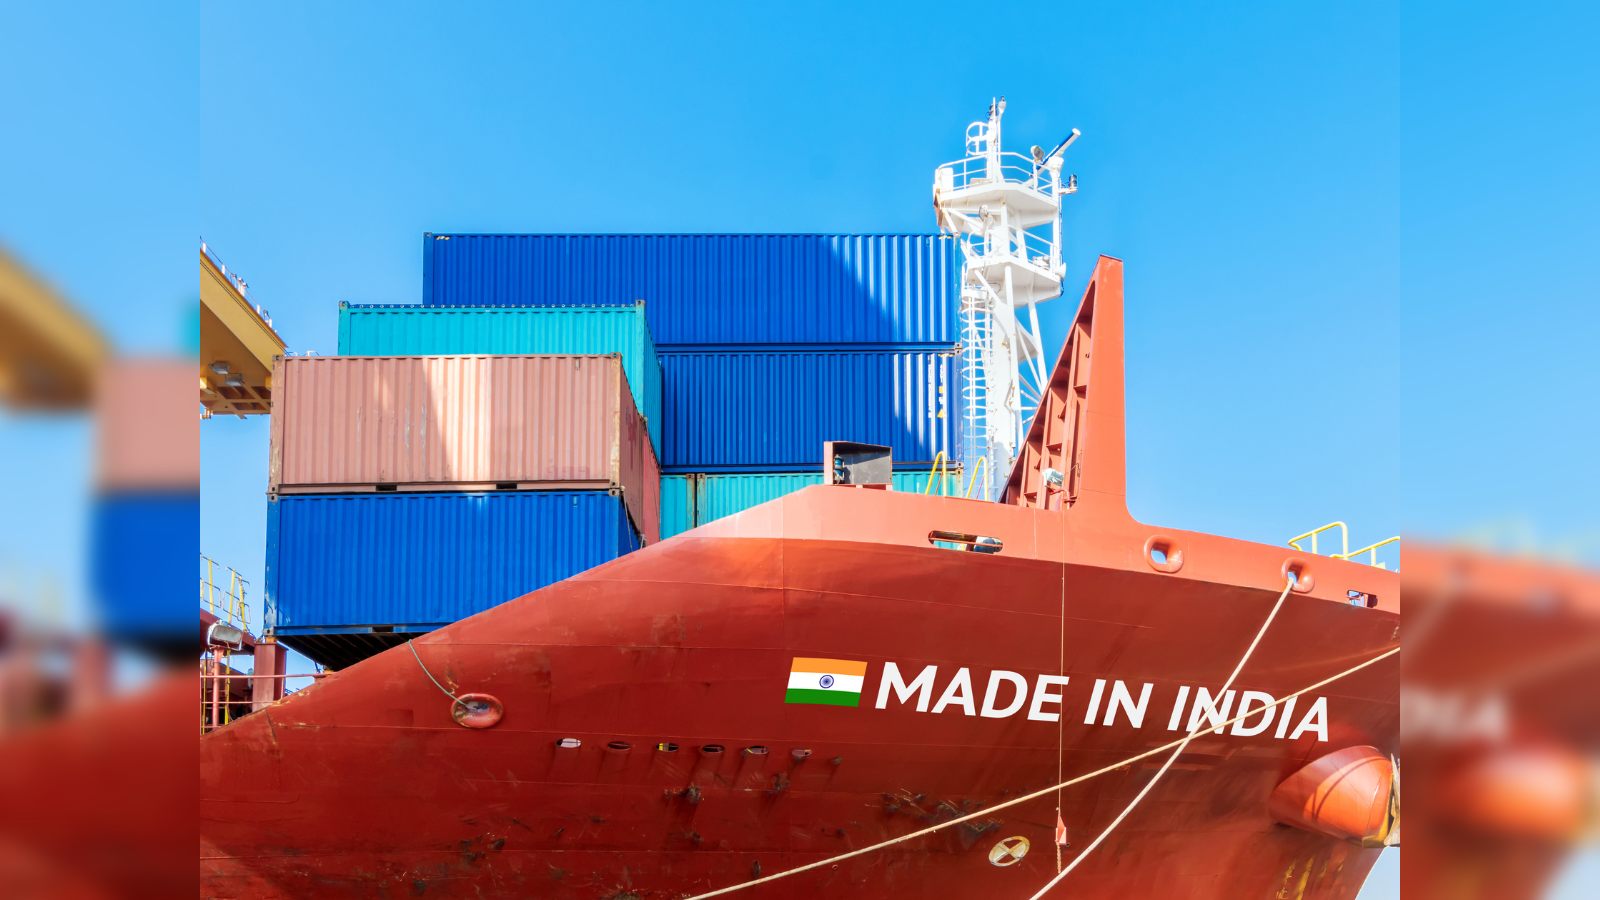 India's exports may take a $30 billion hit on Red Sea threats - The Economic Times